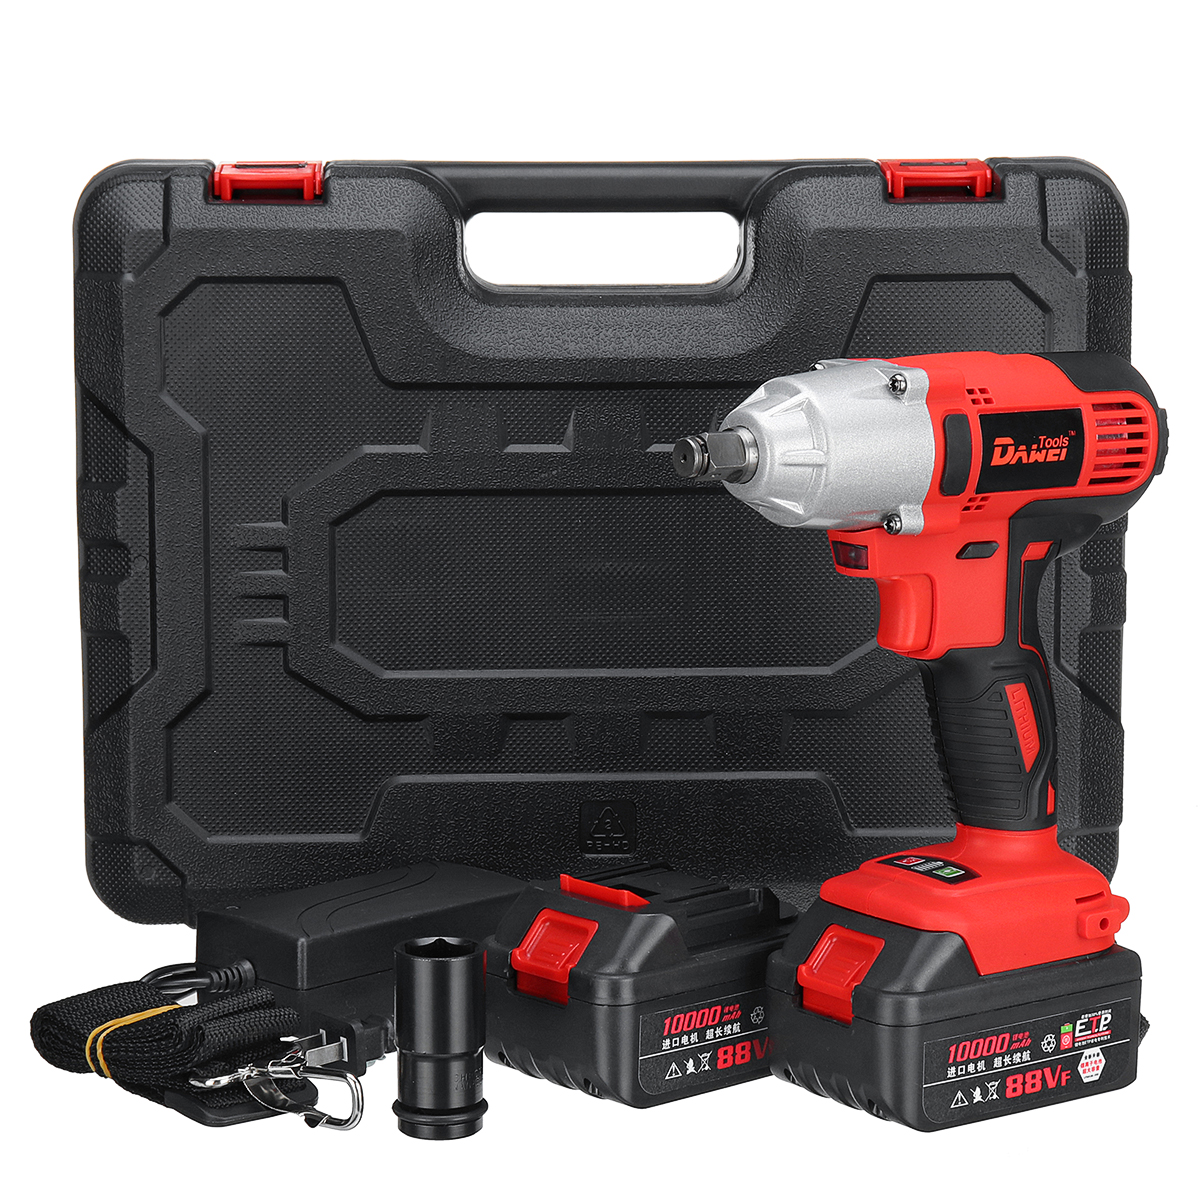 21V-Li-ion-Electric-Impact-Wrench-Cordless-High-Torque-Power-Wrench-with-2-Battery-1283395-2